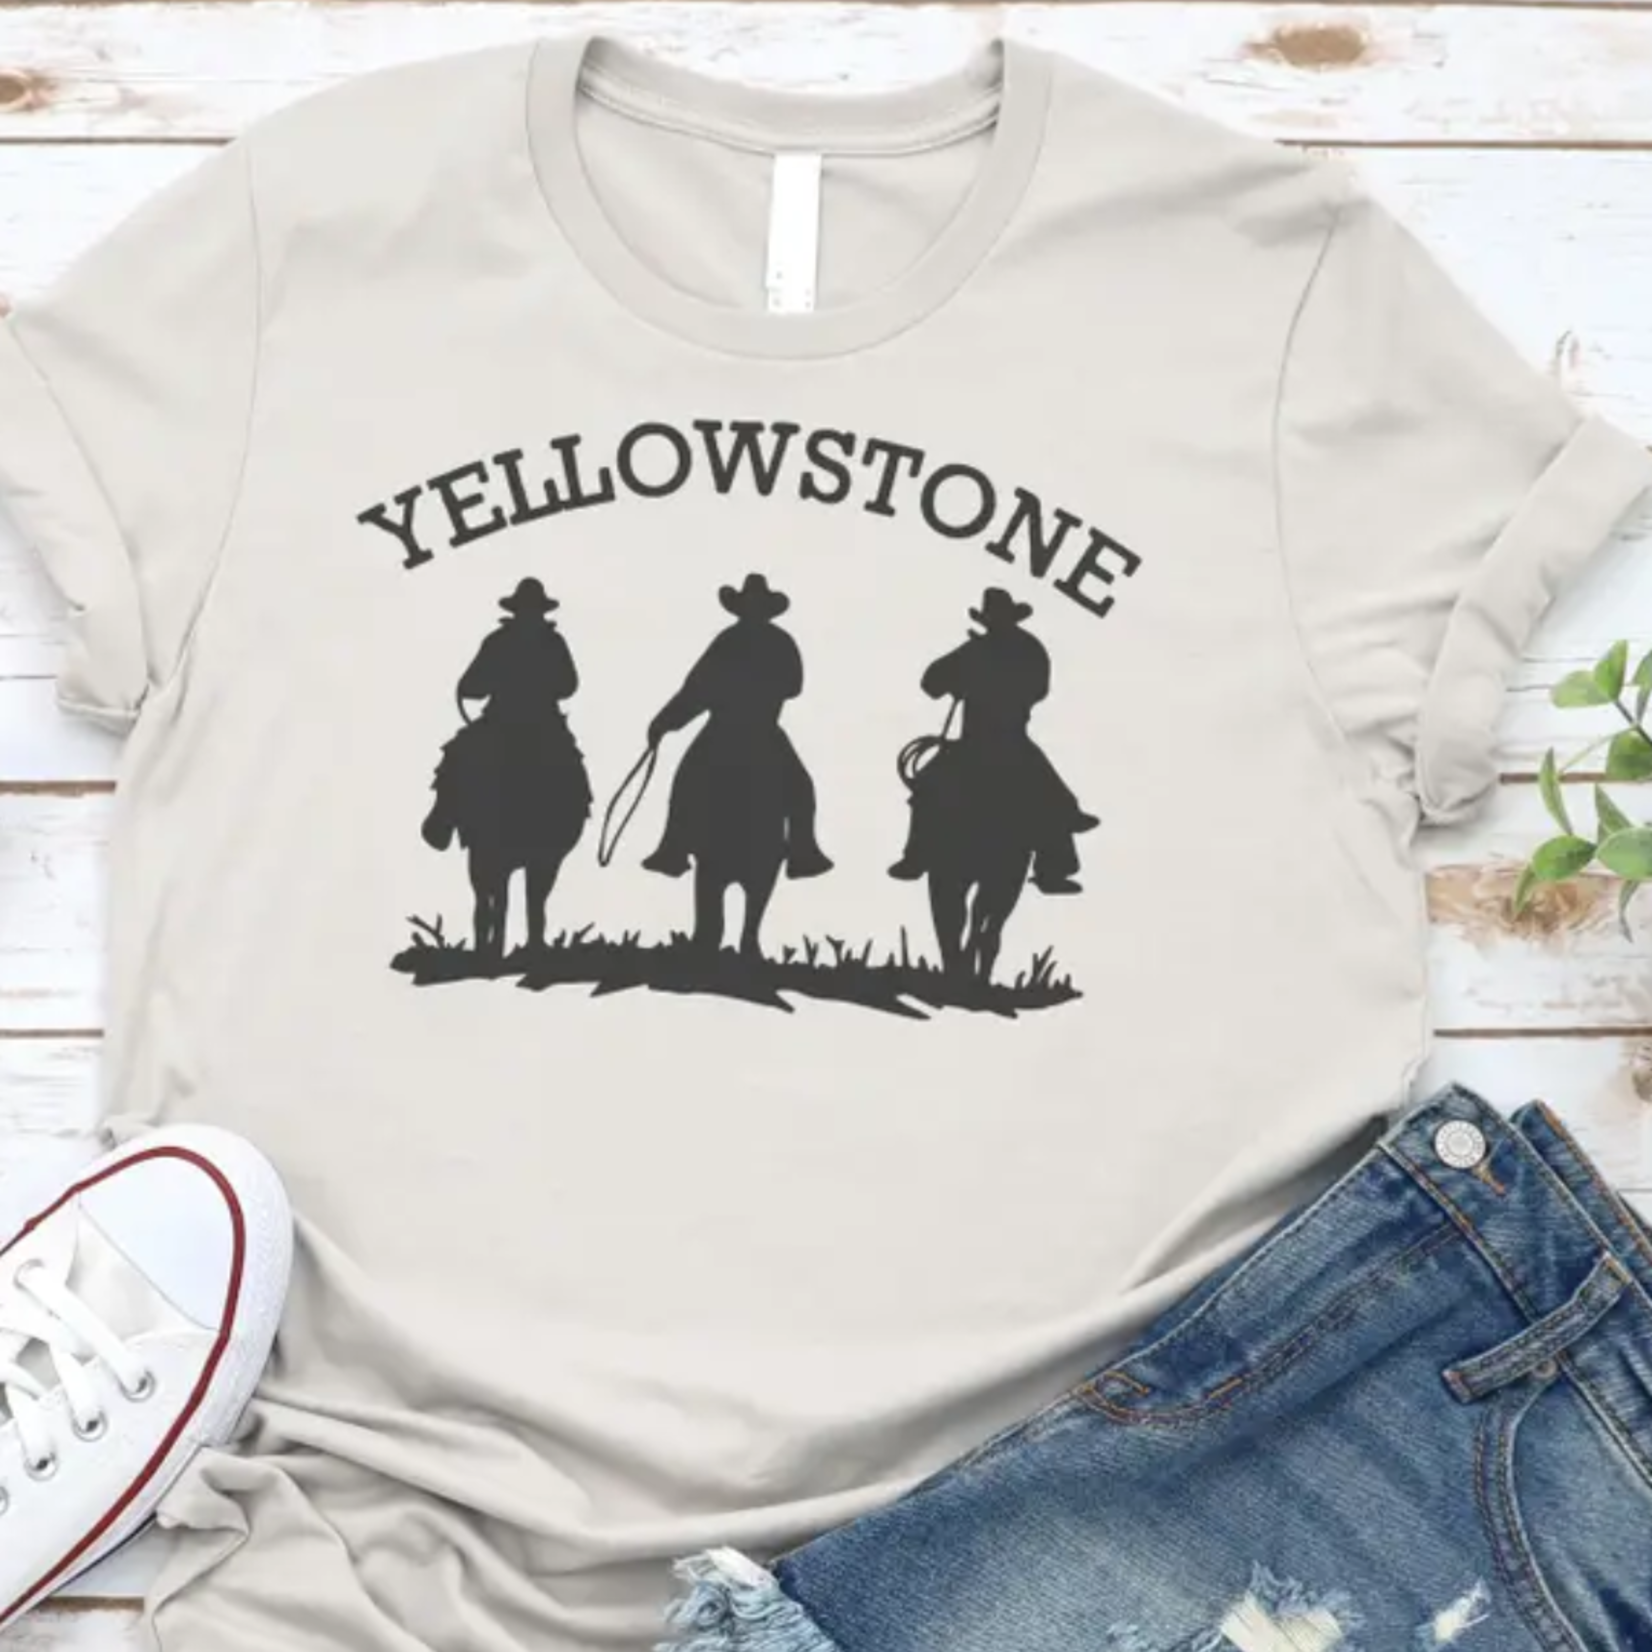 Cowboys of Yellowstone Graphic T